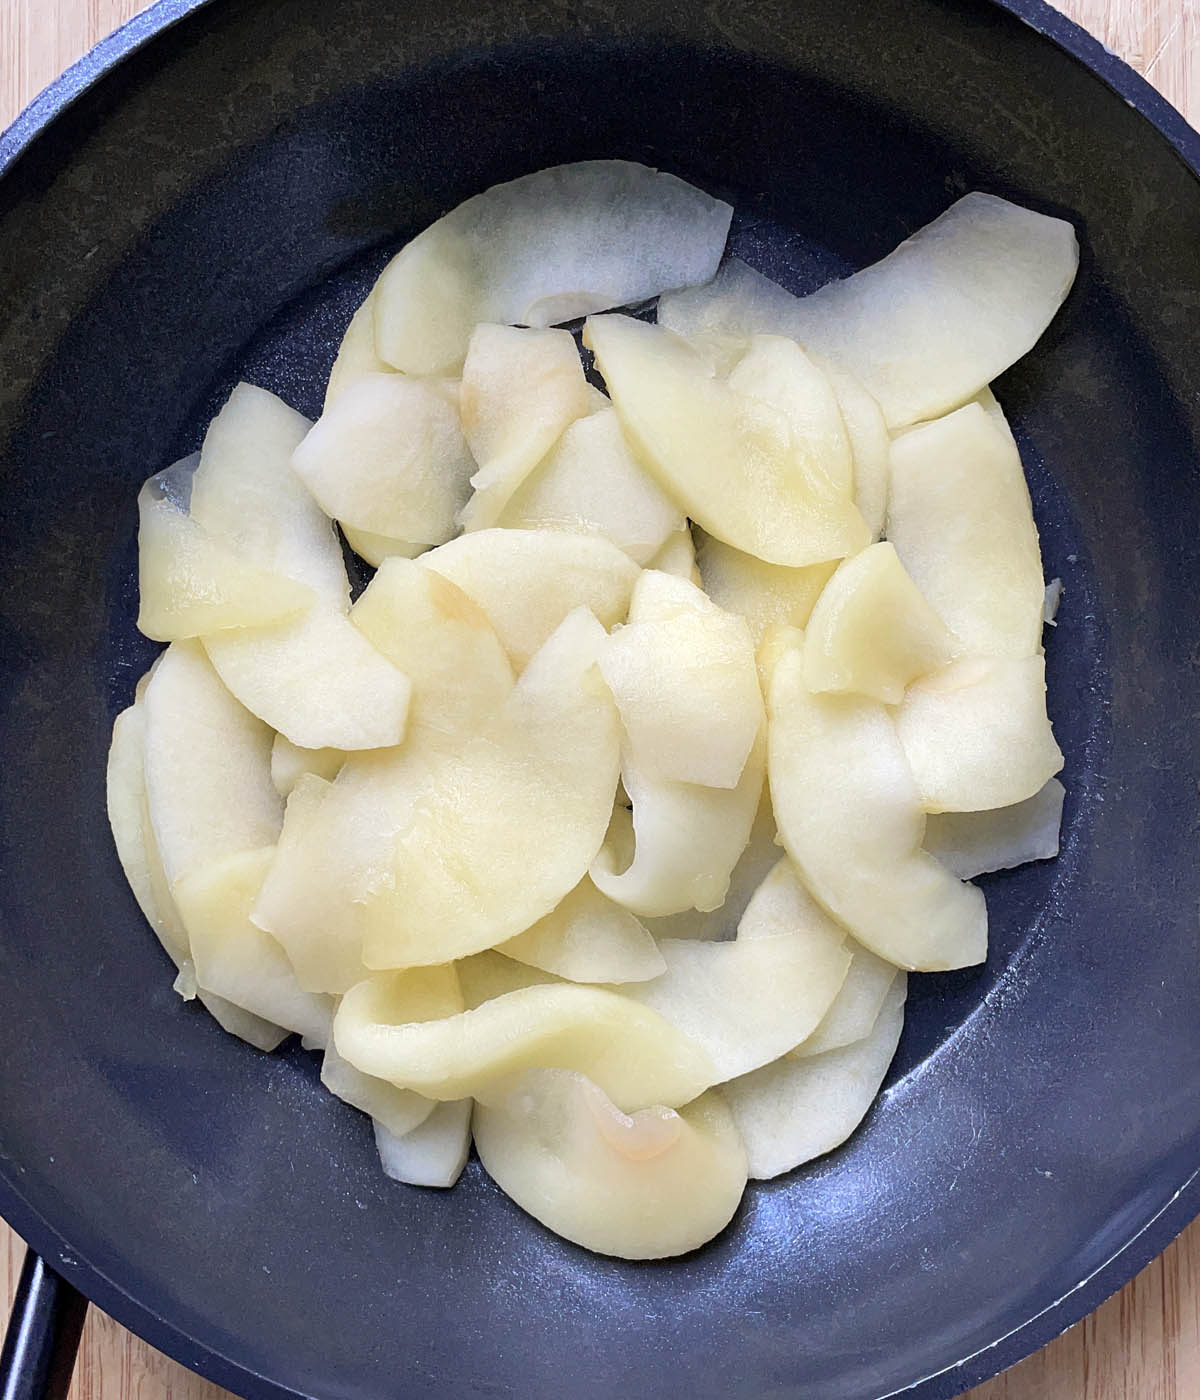 Cooked, wilted apple slices in a dark skillet.